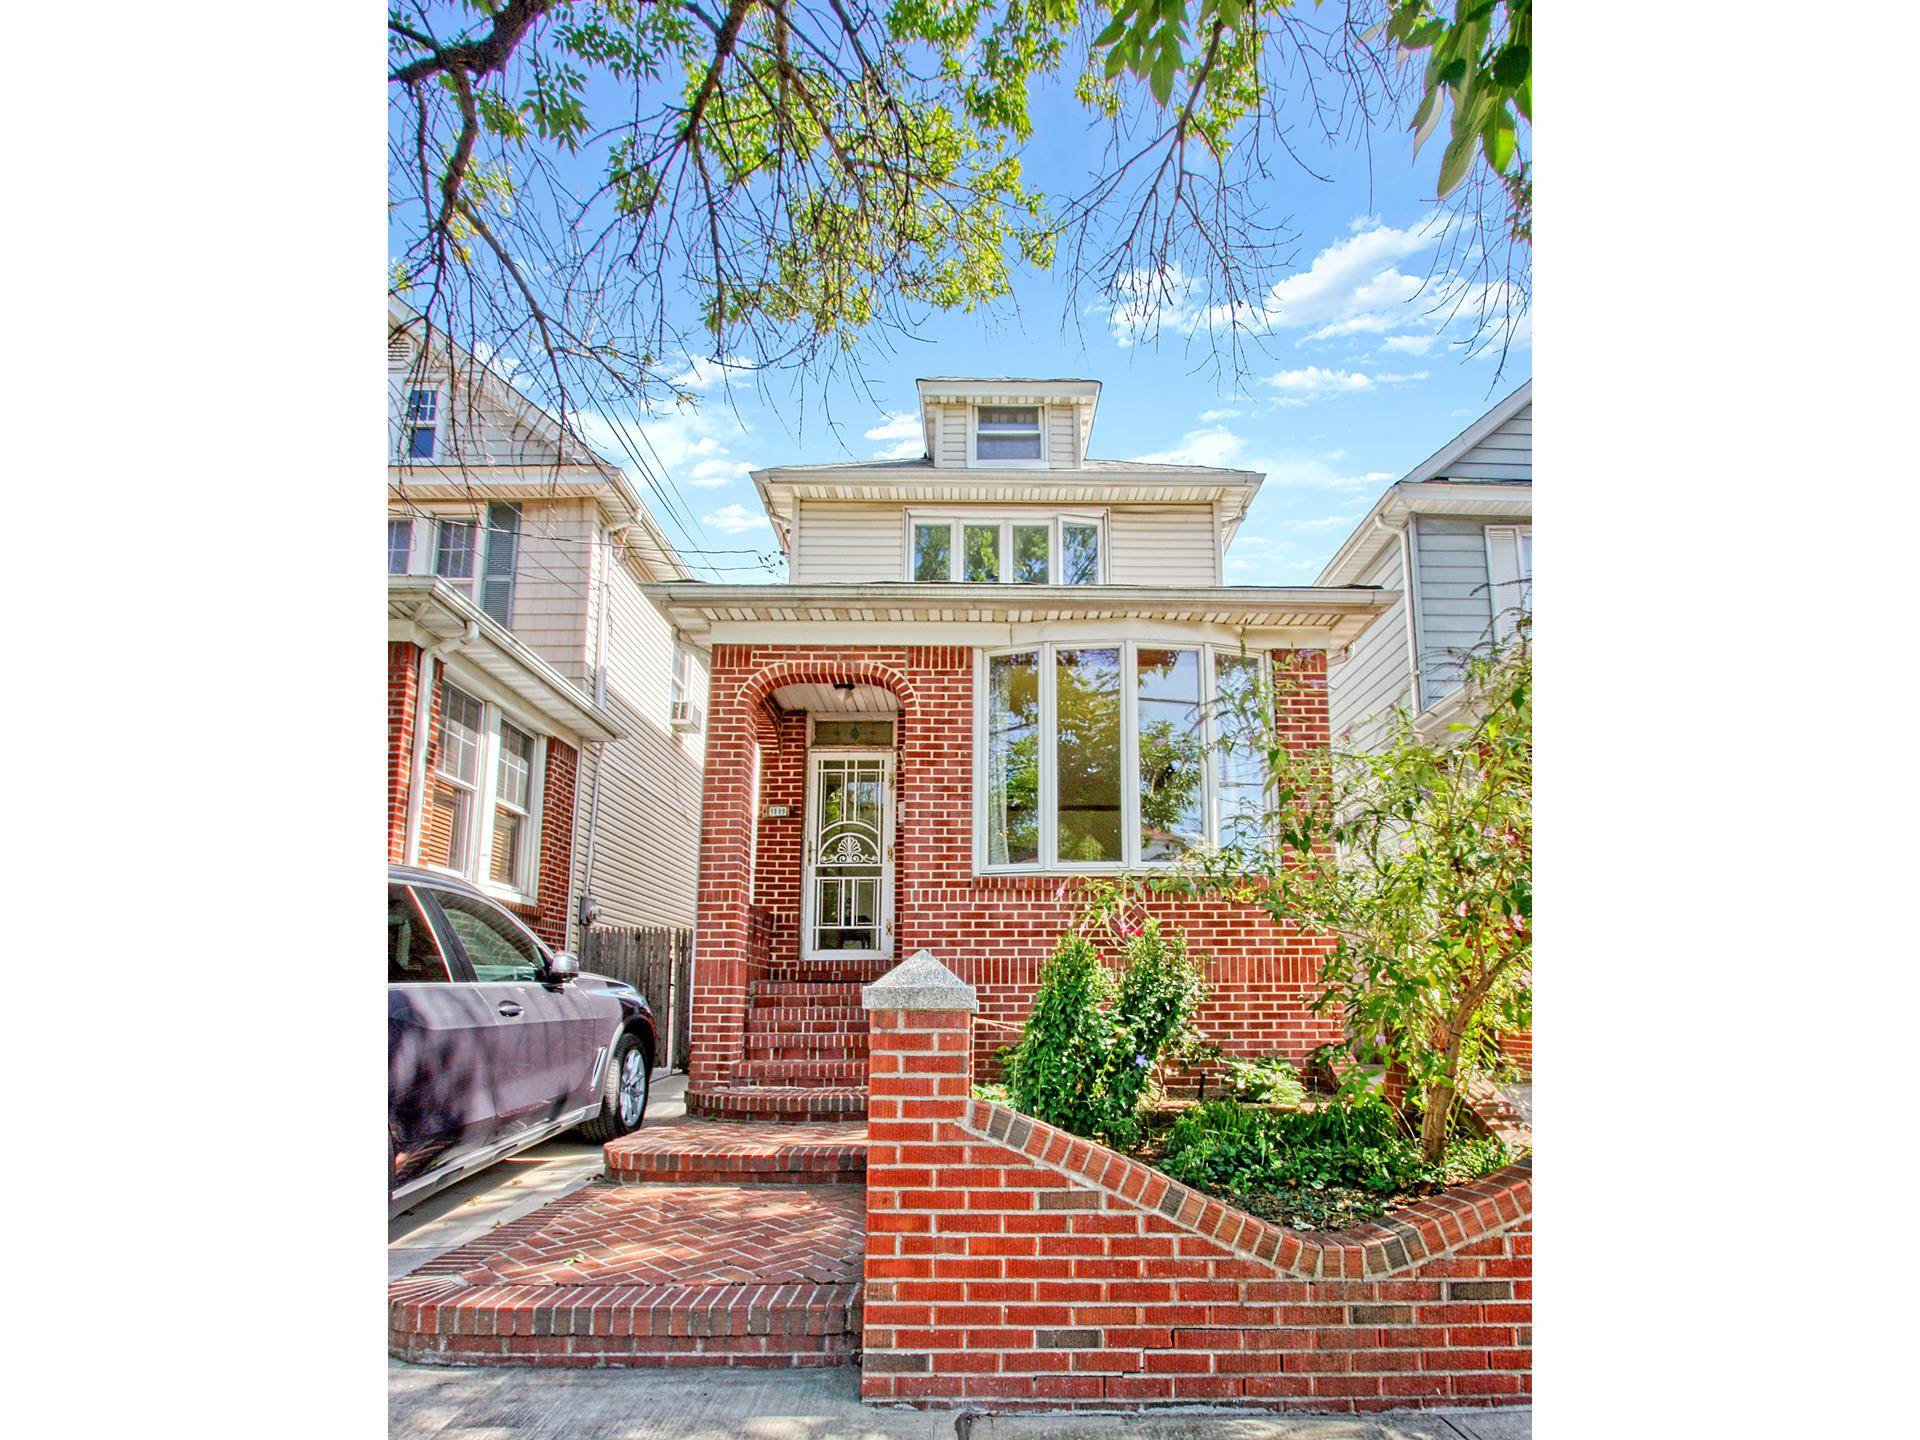 Introducing 1809 Albany Avenue, a mid 20th century detached single family located on a leafy block in East Flatbush.